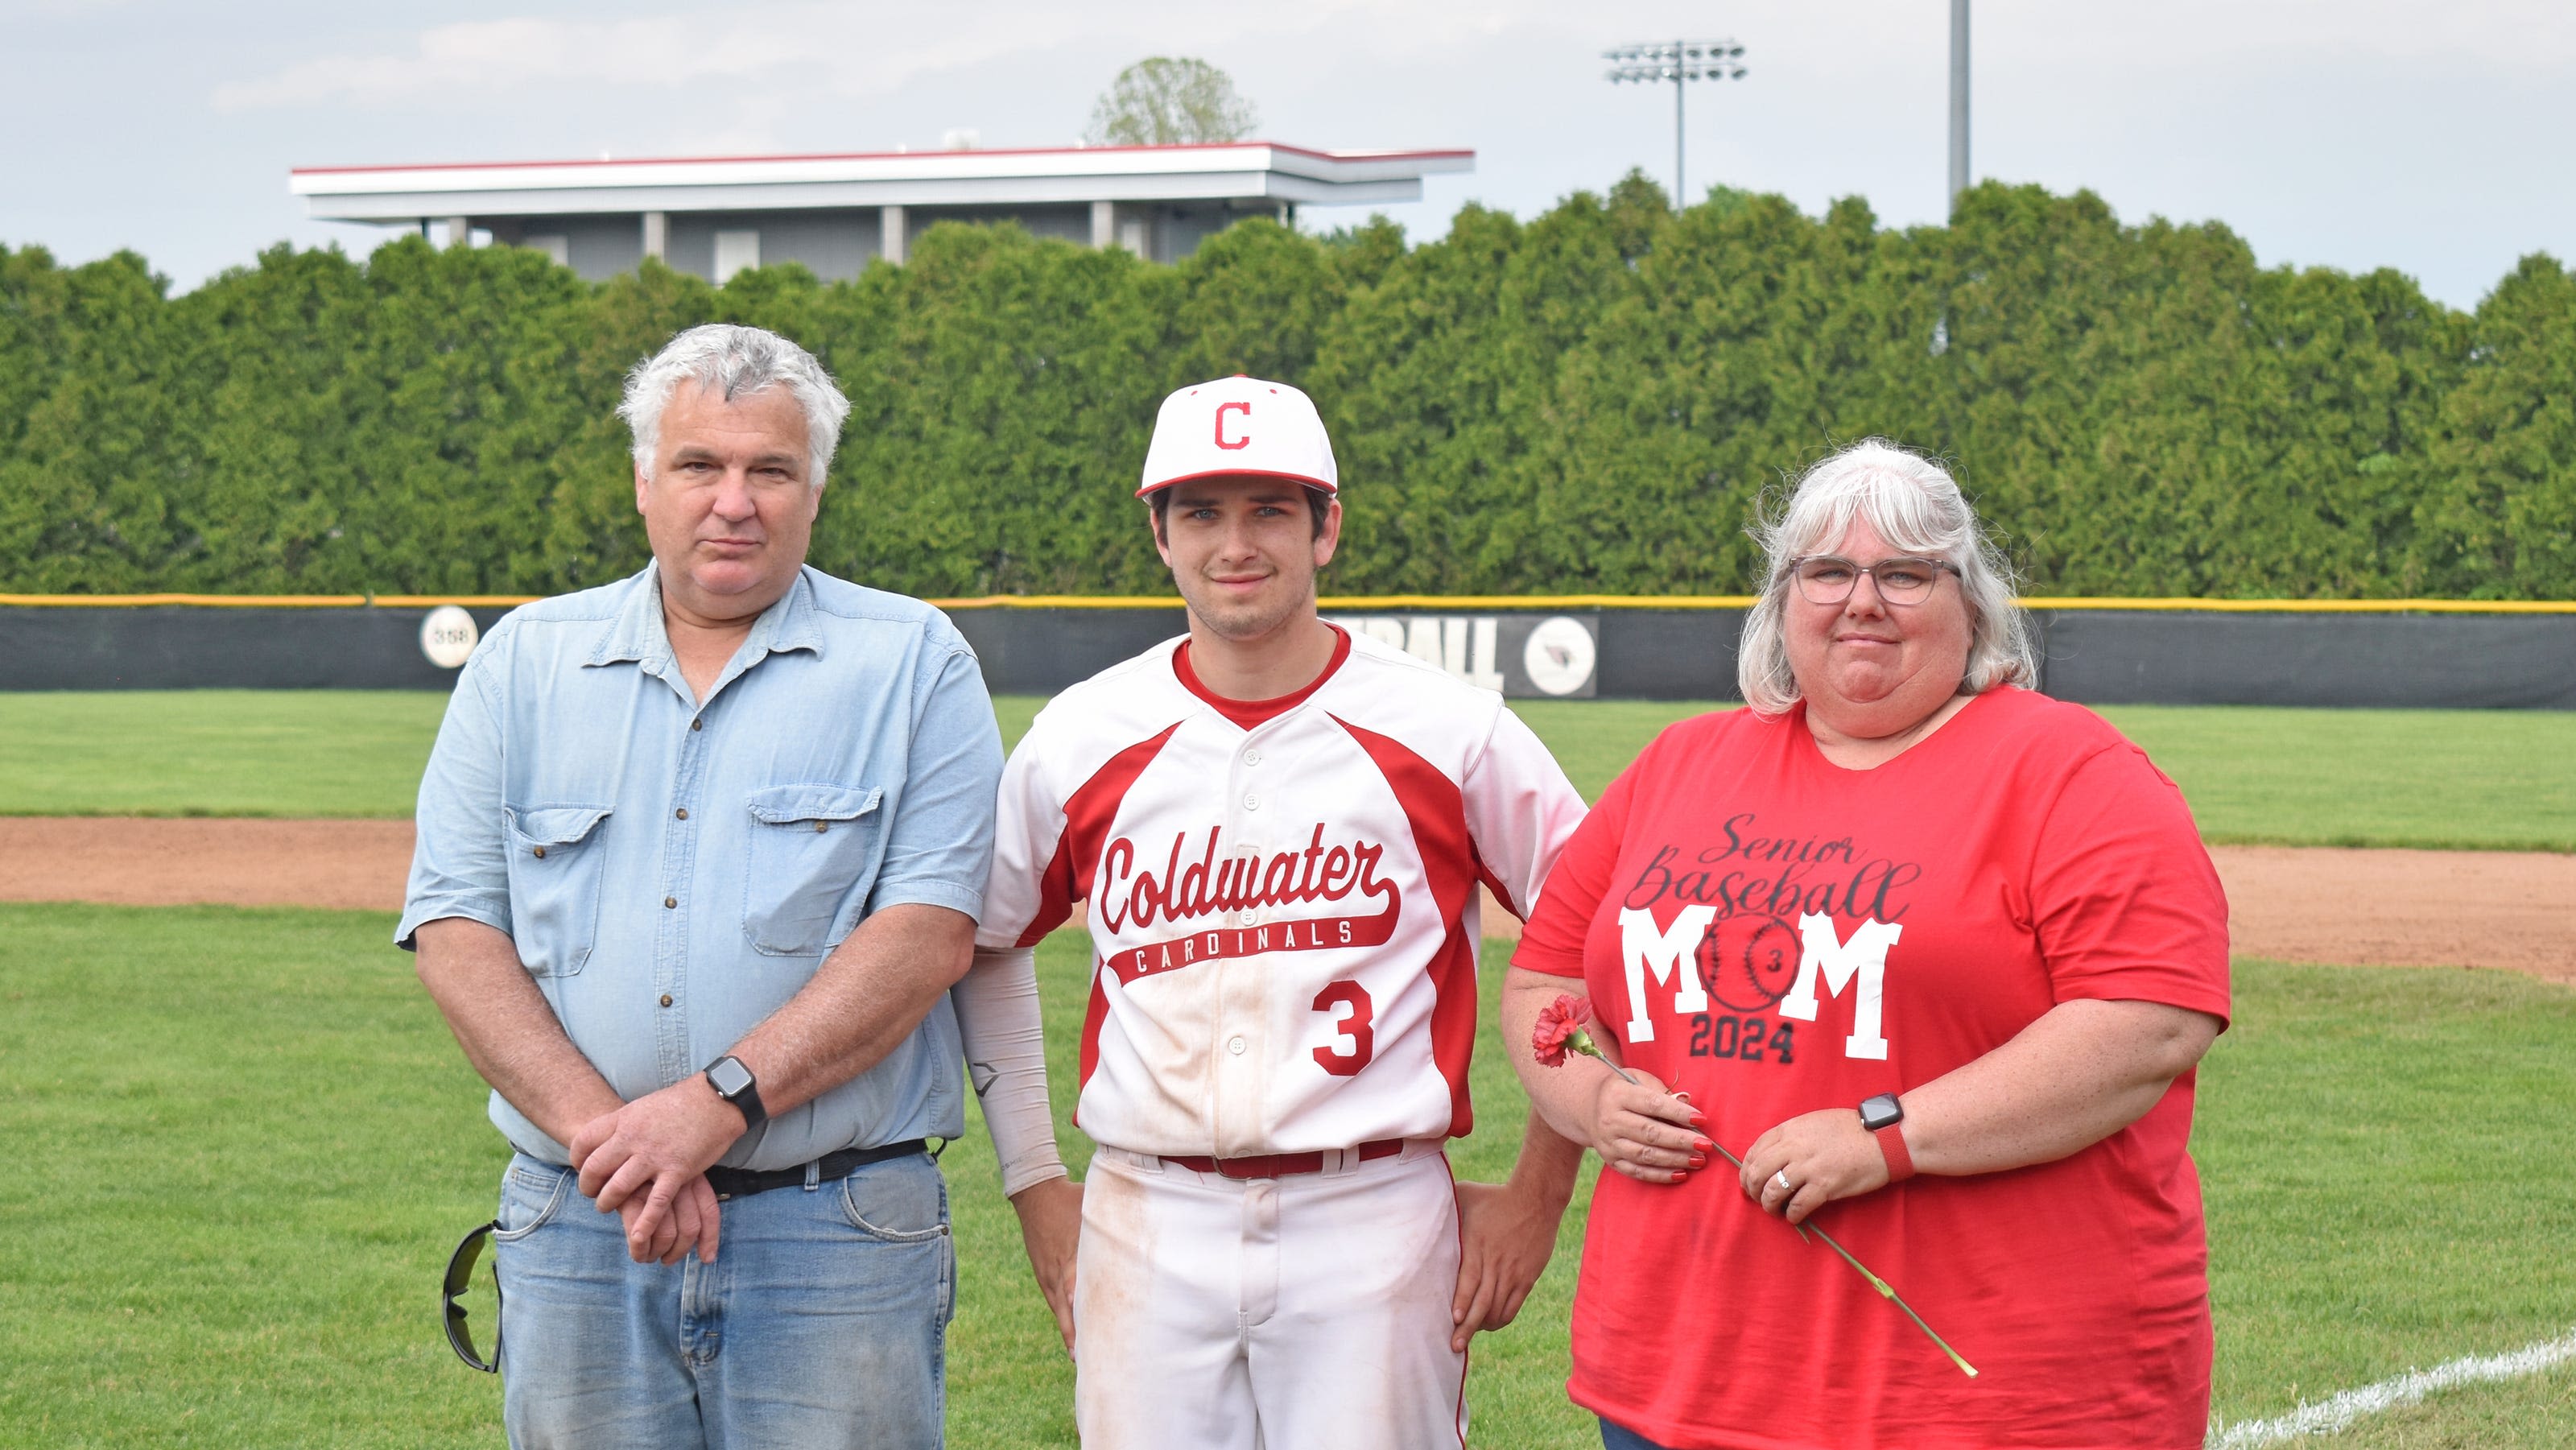 Images from Coldwater baseball's celebration of their seniors with Senior Night